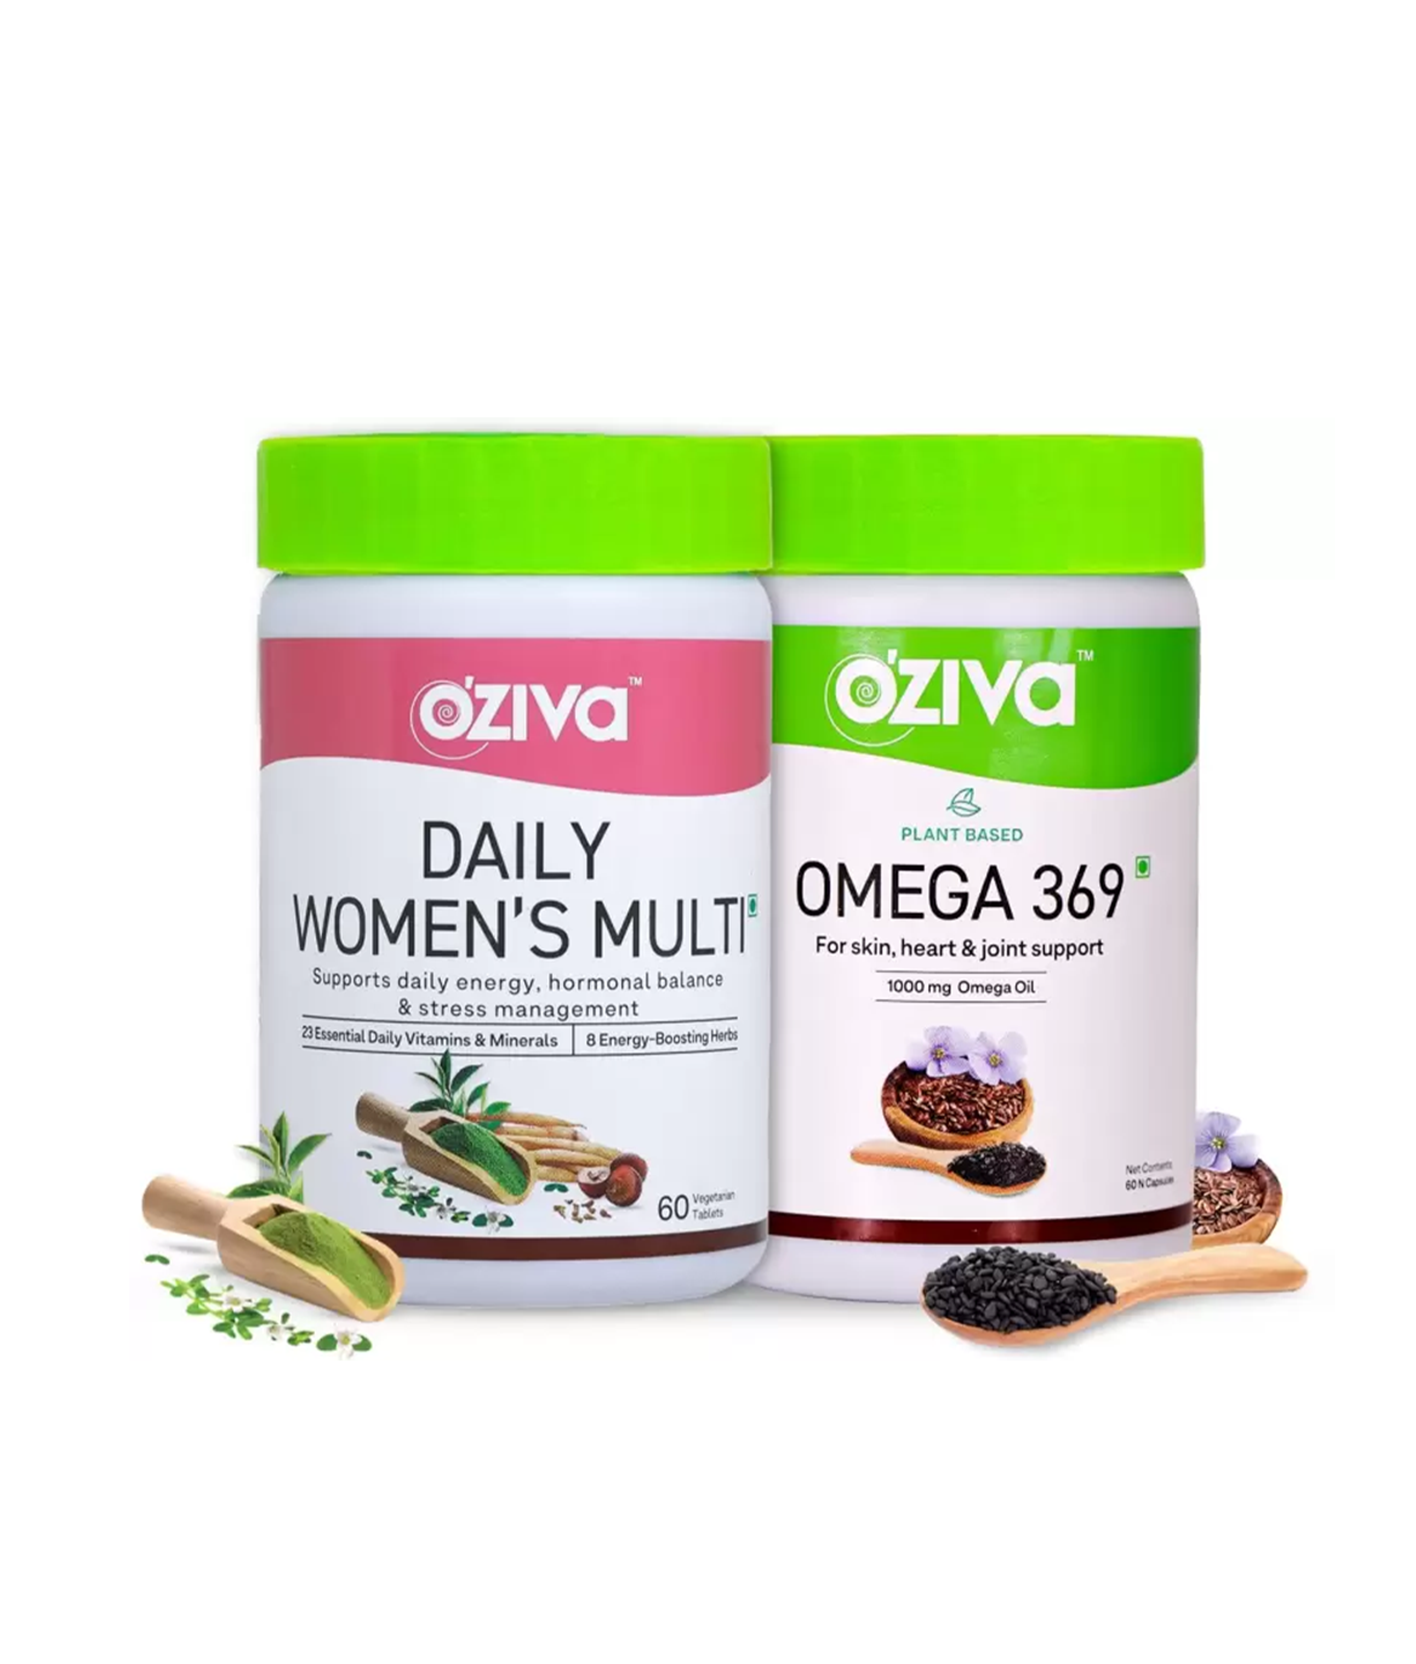 Wellness Combo For Women (Daily Women’s Multi with 23 Multivitamins & Minerals And Omega 369 With Vegan Omega) For Energy, Hormonal Balance, Heart & Joint Health